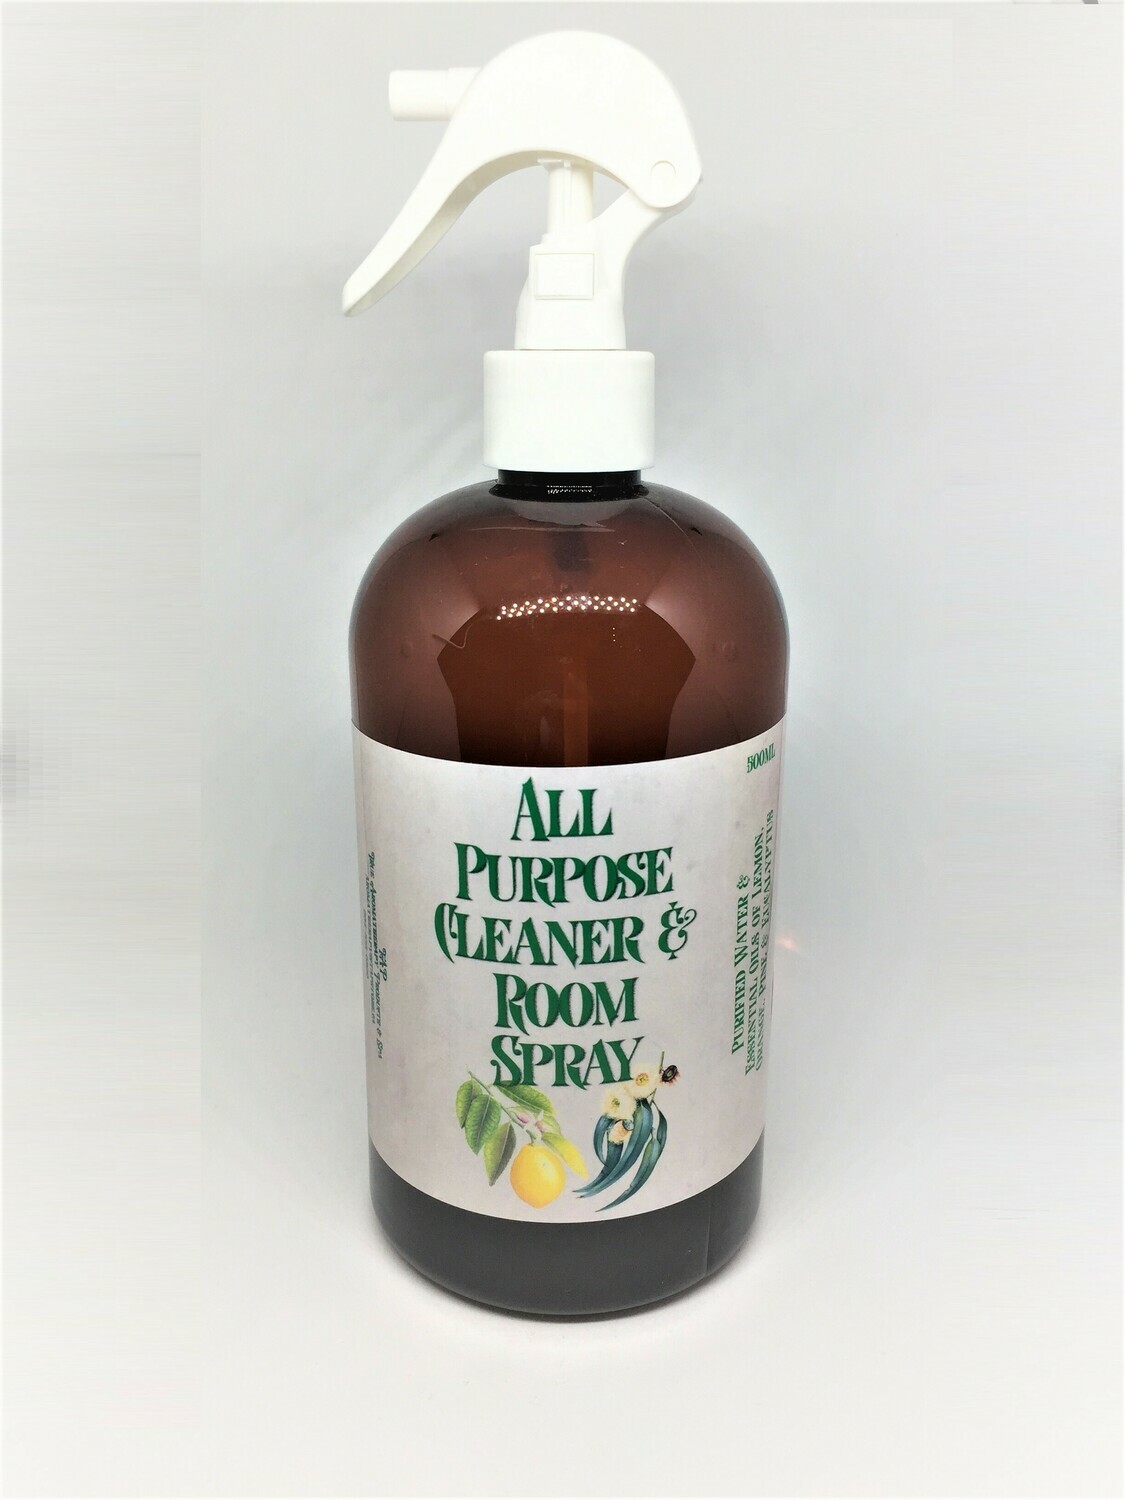 All Purpose Cleaner & Room Spray